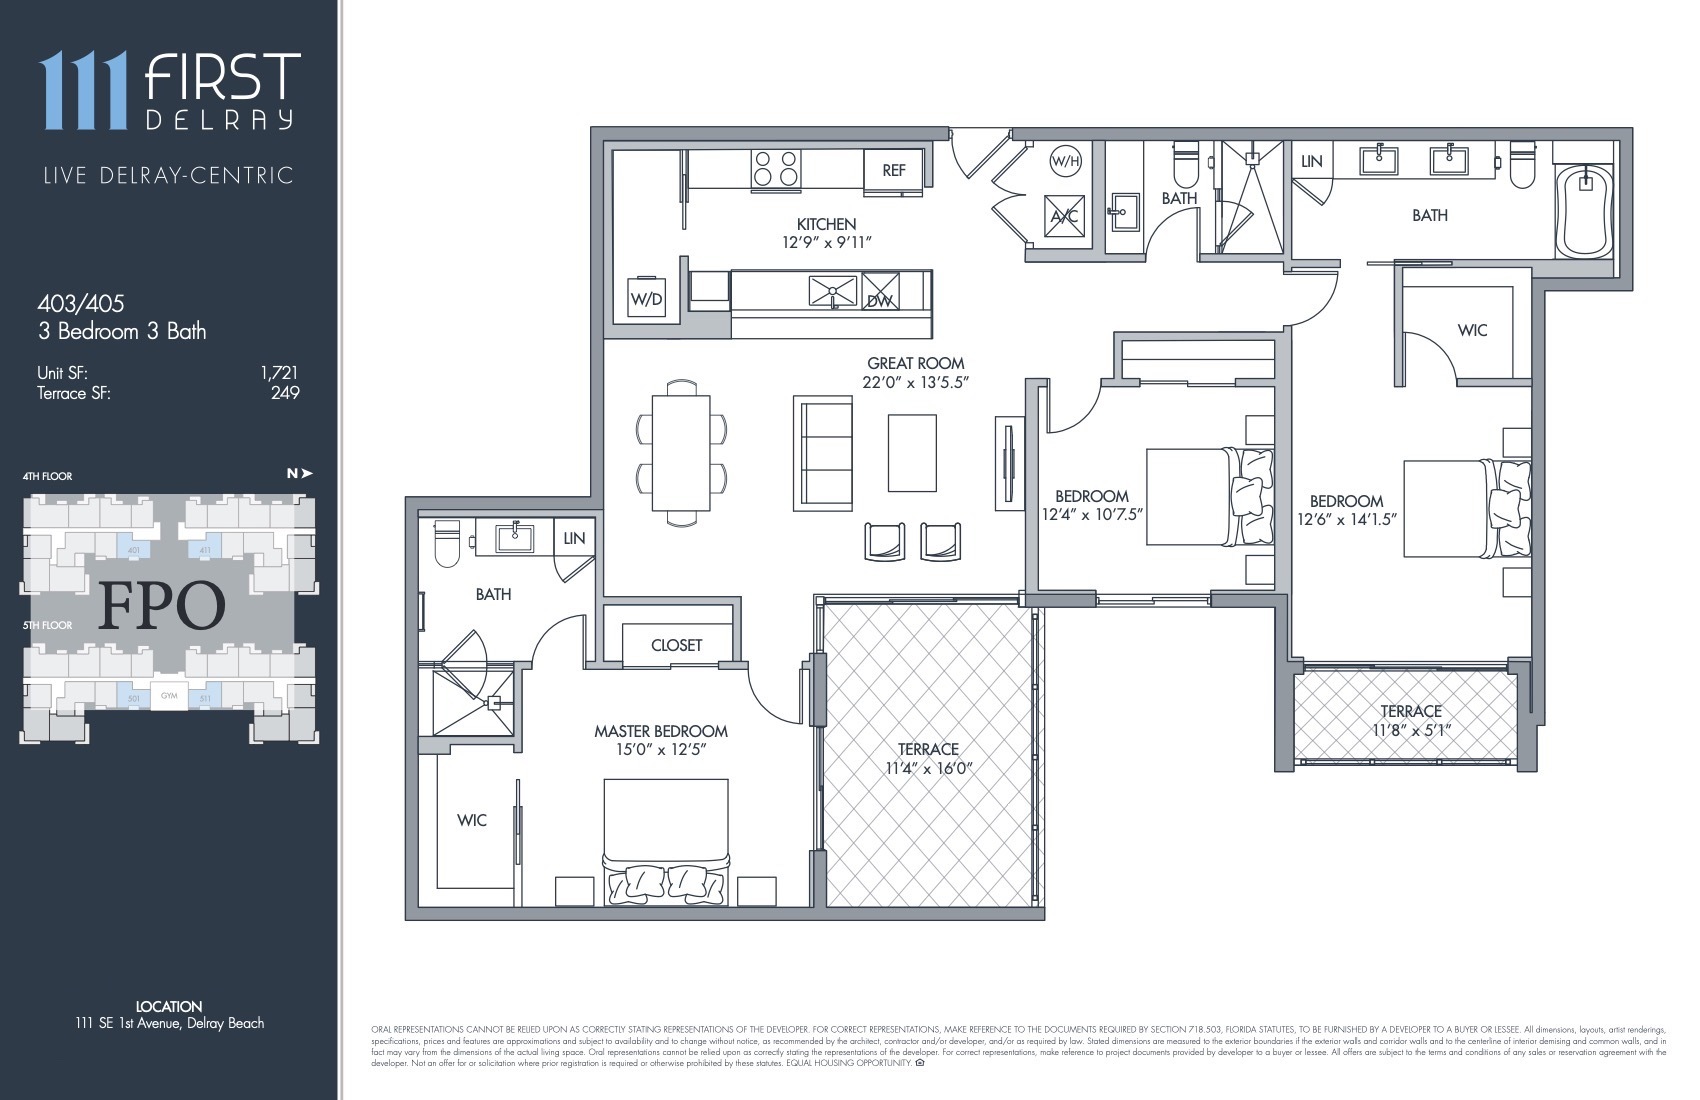 Floor Plan for 111 First Delray Floorplans, FPO